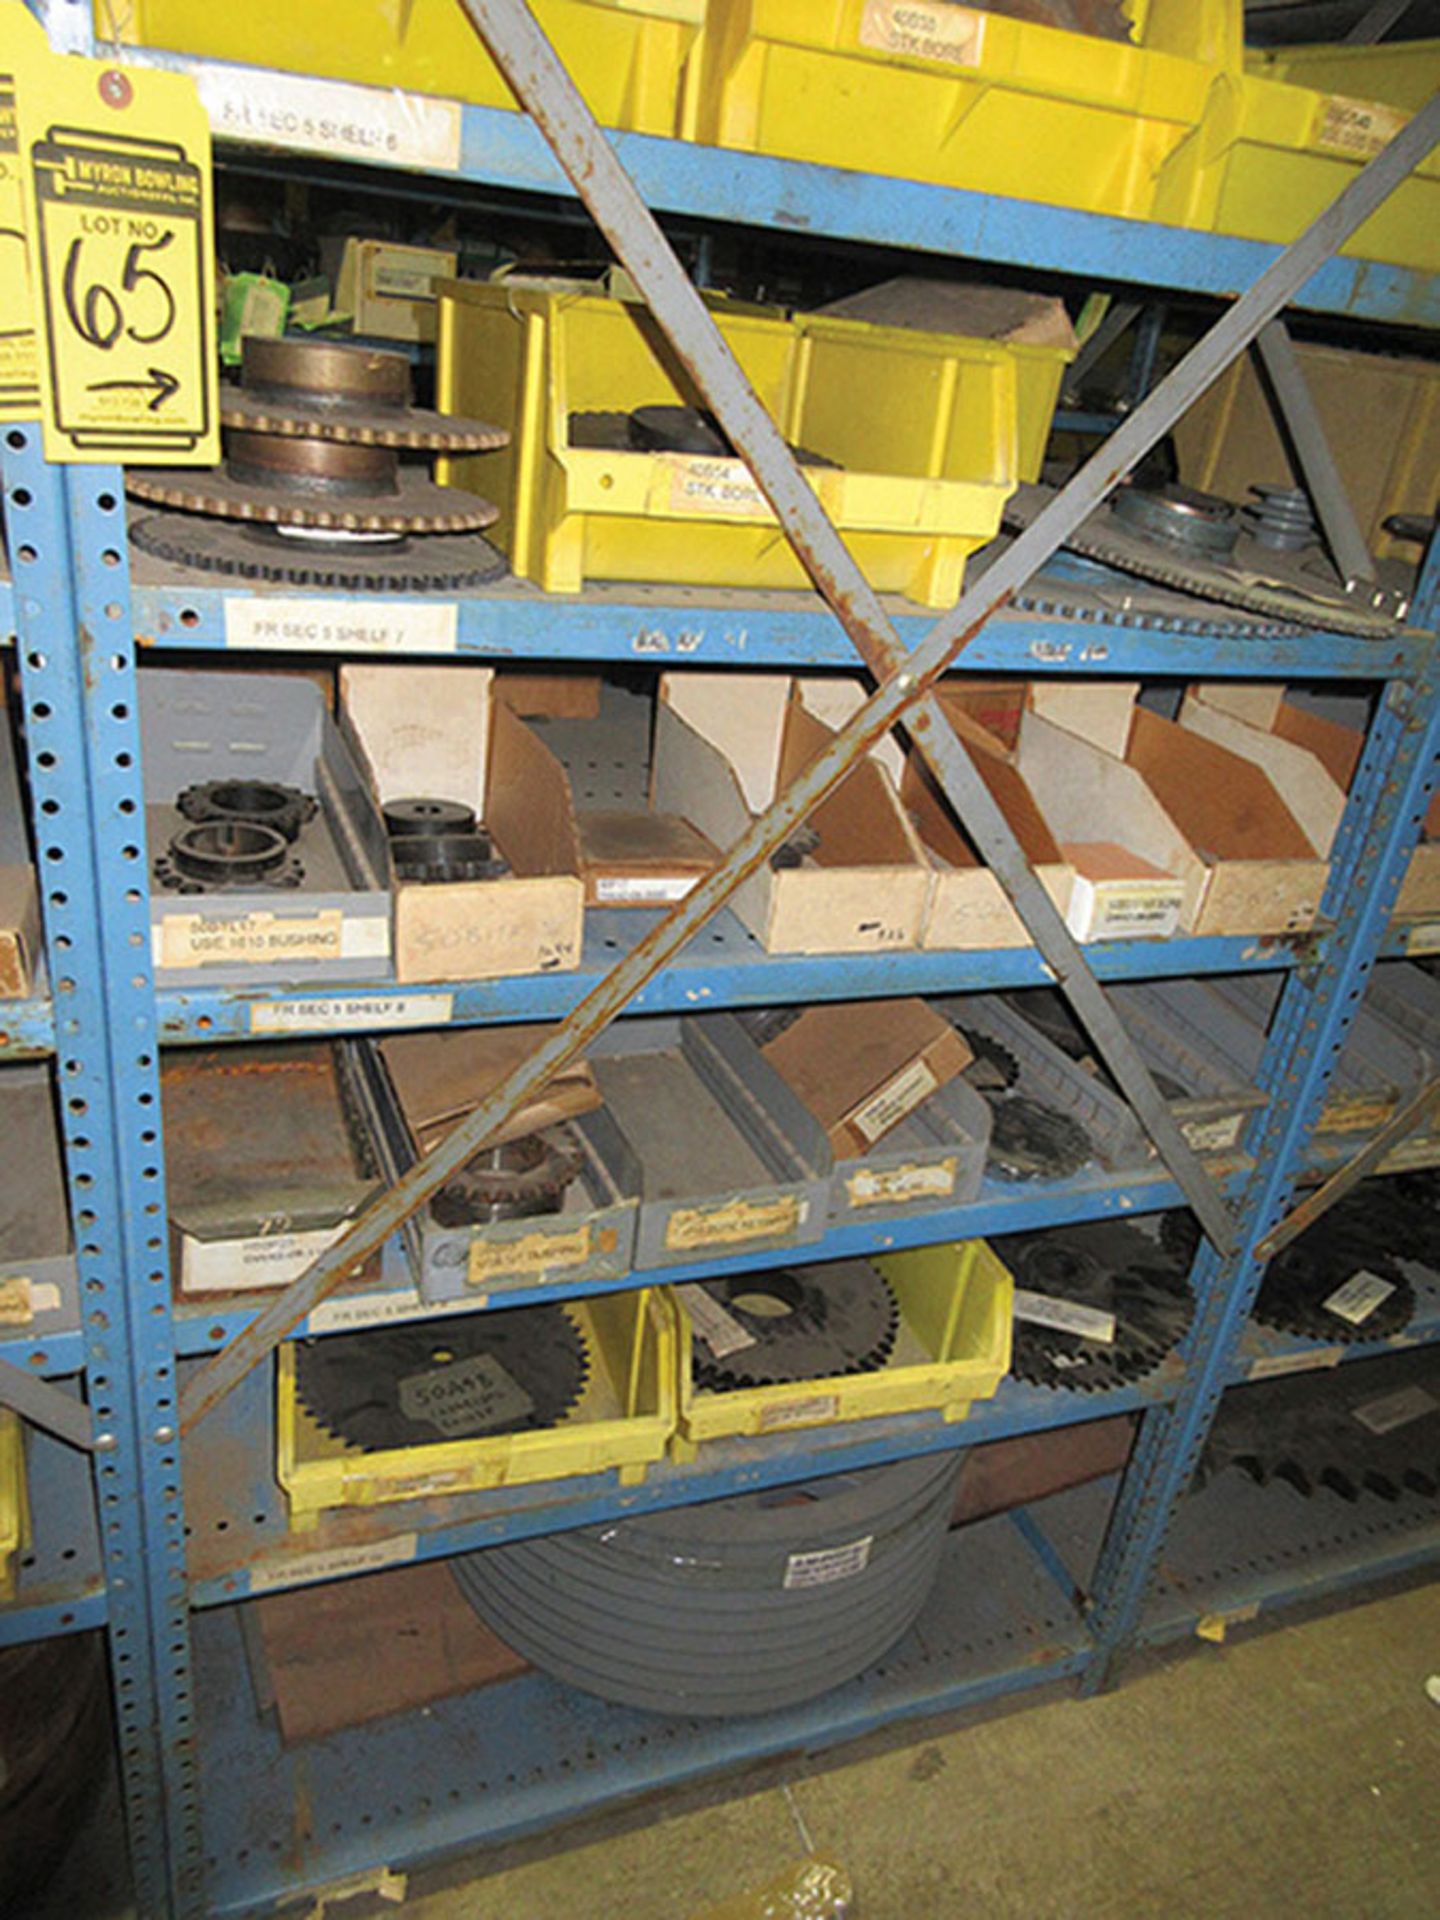 CONTENTS OF (1) SIDE, (5) SECTIONS OF SHELF UNIT: LARGE QUANTITY OF SOCKETS - MANY SIZES; BUSSMAN